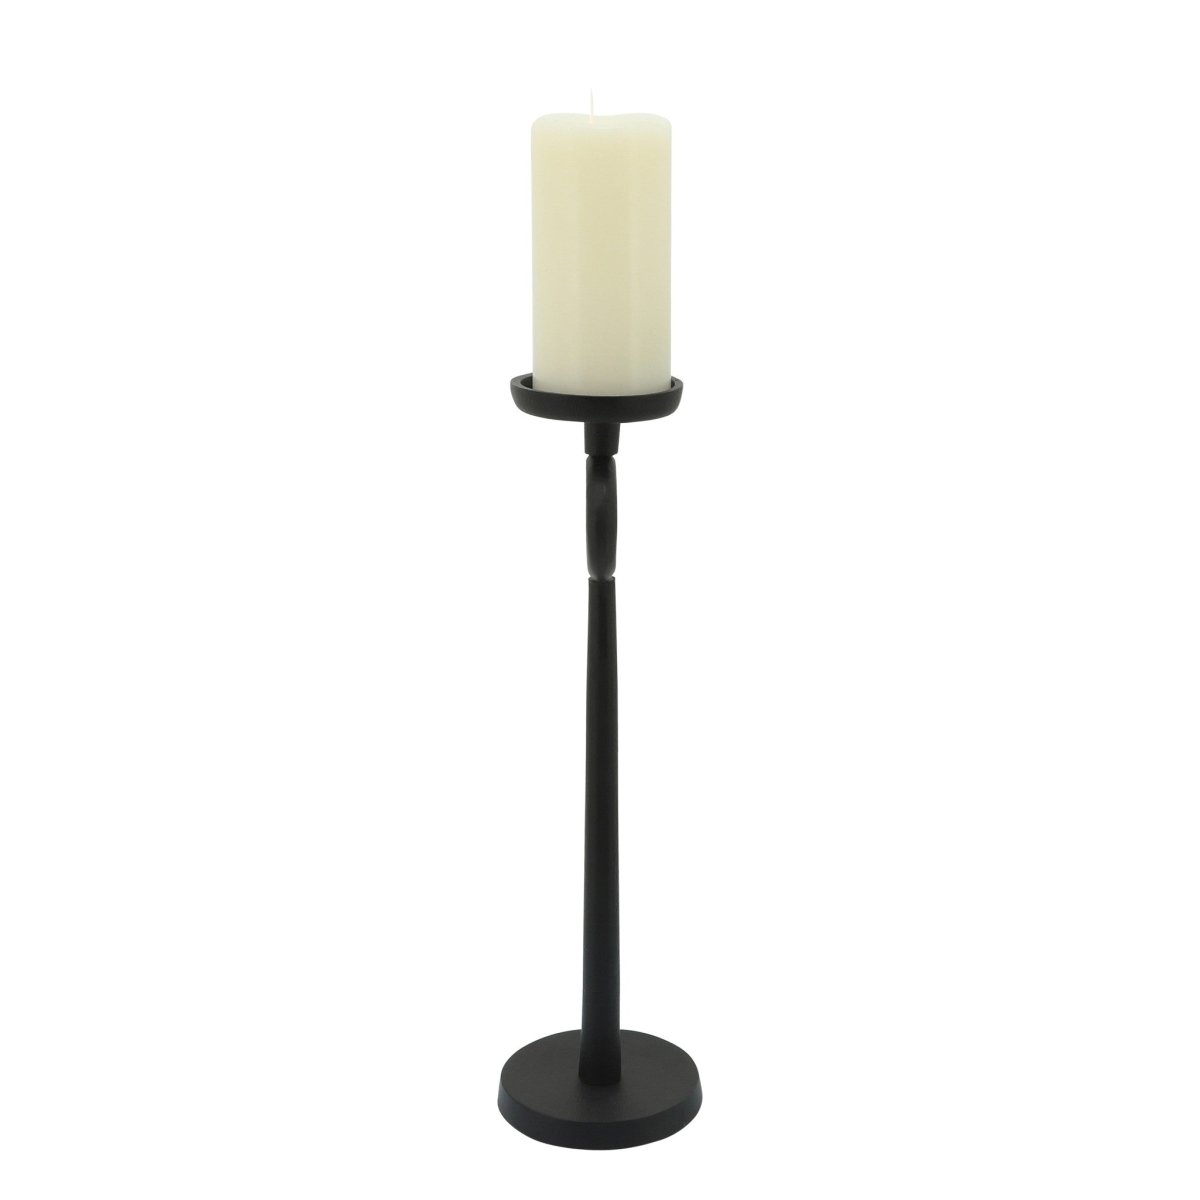 lily & onyx Black Metal Candle Holder with Circle Design - lily & onyx